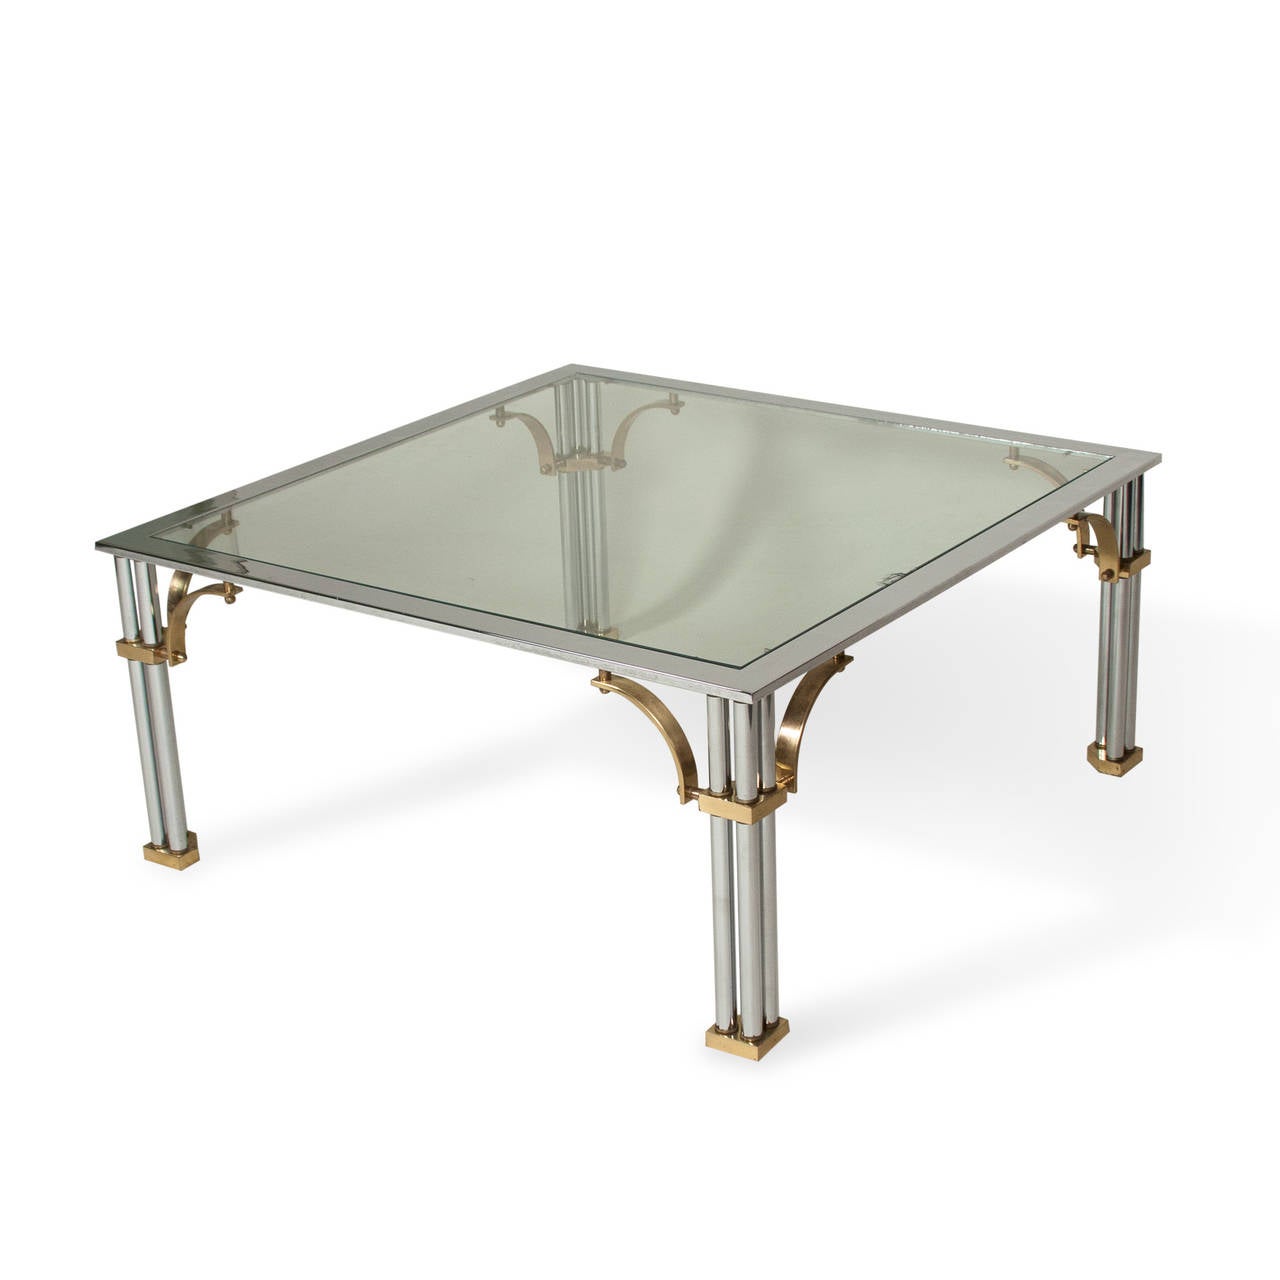 Chrome and brass square coffee table,  double legs with brass corner detail, American 1980s. 36 in square, height 16 in. (Item #2285)